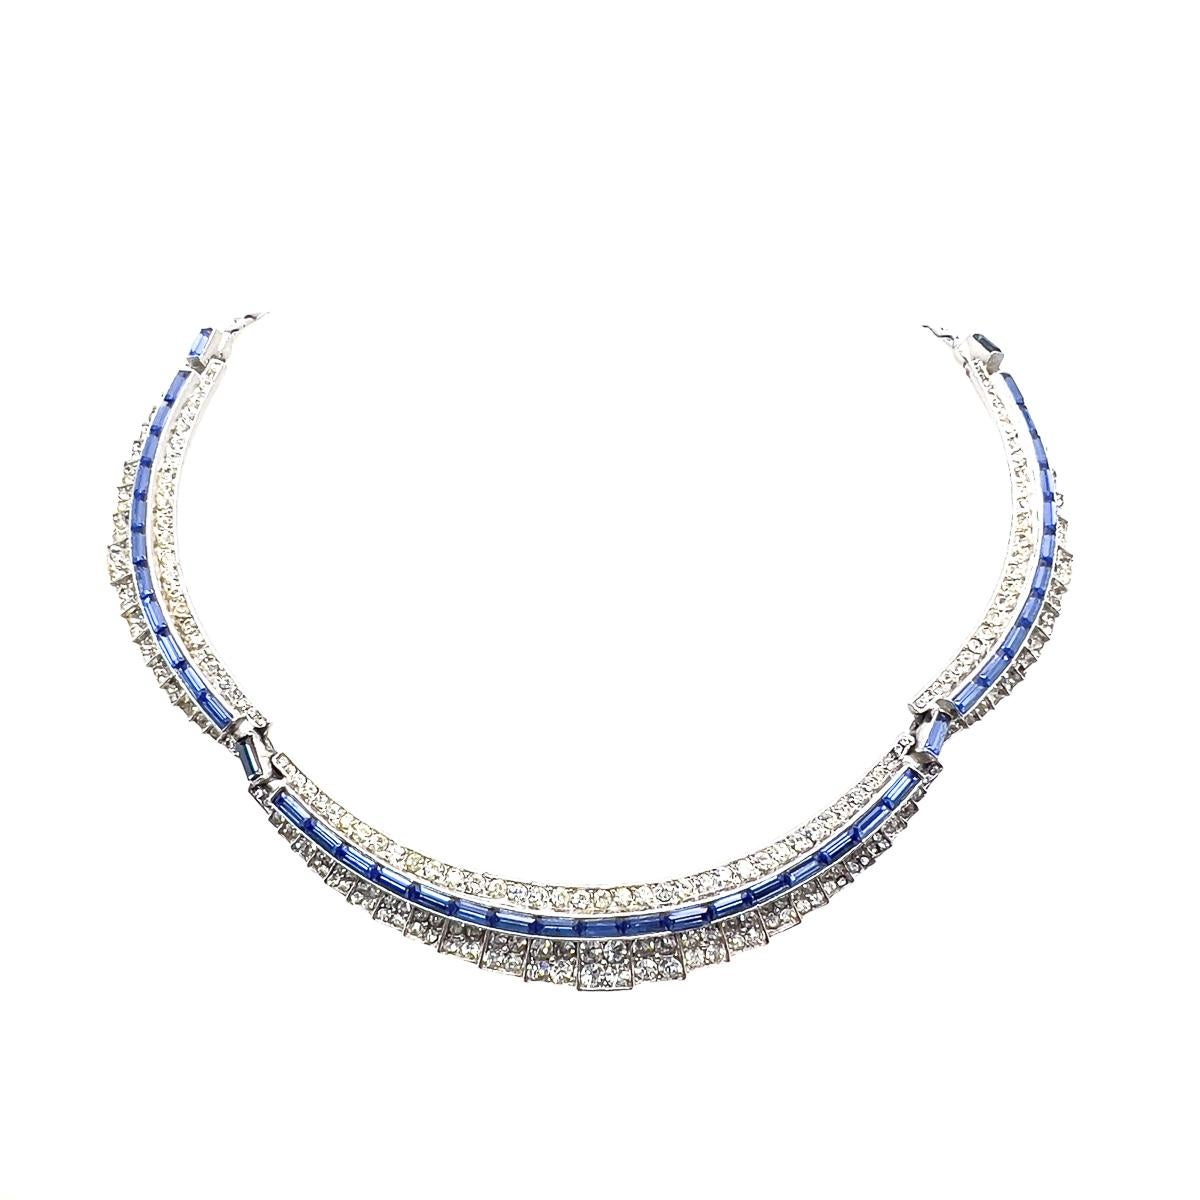 A Vintage Sapphire Crystal Line Collar. So very Marcel Boucher in style. Art Deco design marries with the cocktail glamour of the 1950s. A demure finishing touch that will prove both captivating and timeless.
An unsigned beauty. A rare treasure.